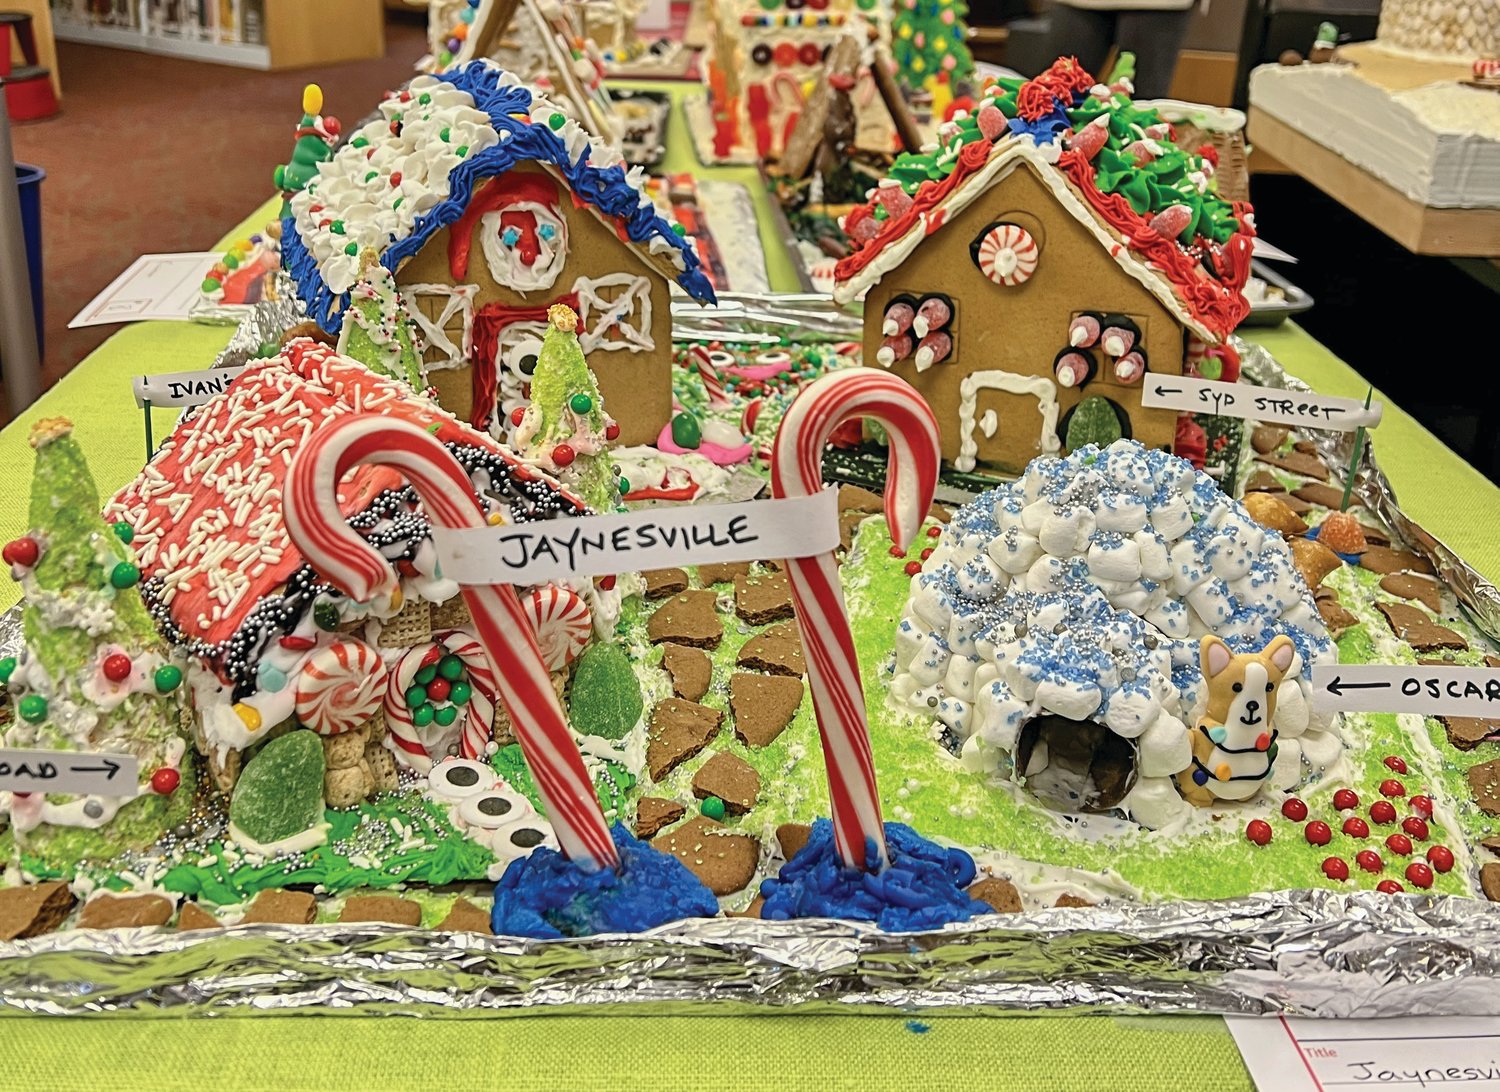 Creatives in the area should be excited for the upcoming 28th annual Uptown Gingerbread Contest at the Port Townsend Public Library.